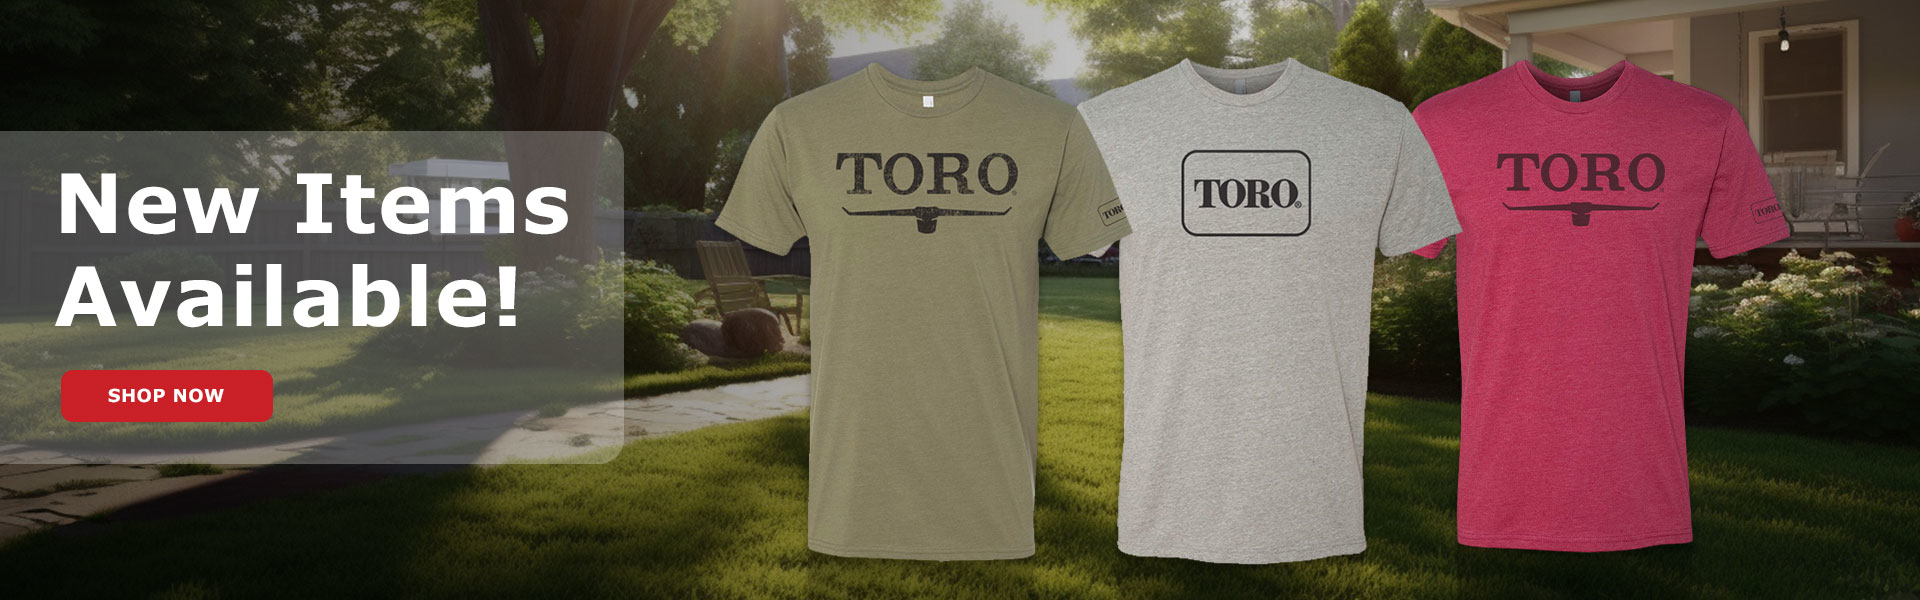 New Toro Gear Apparel is now available